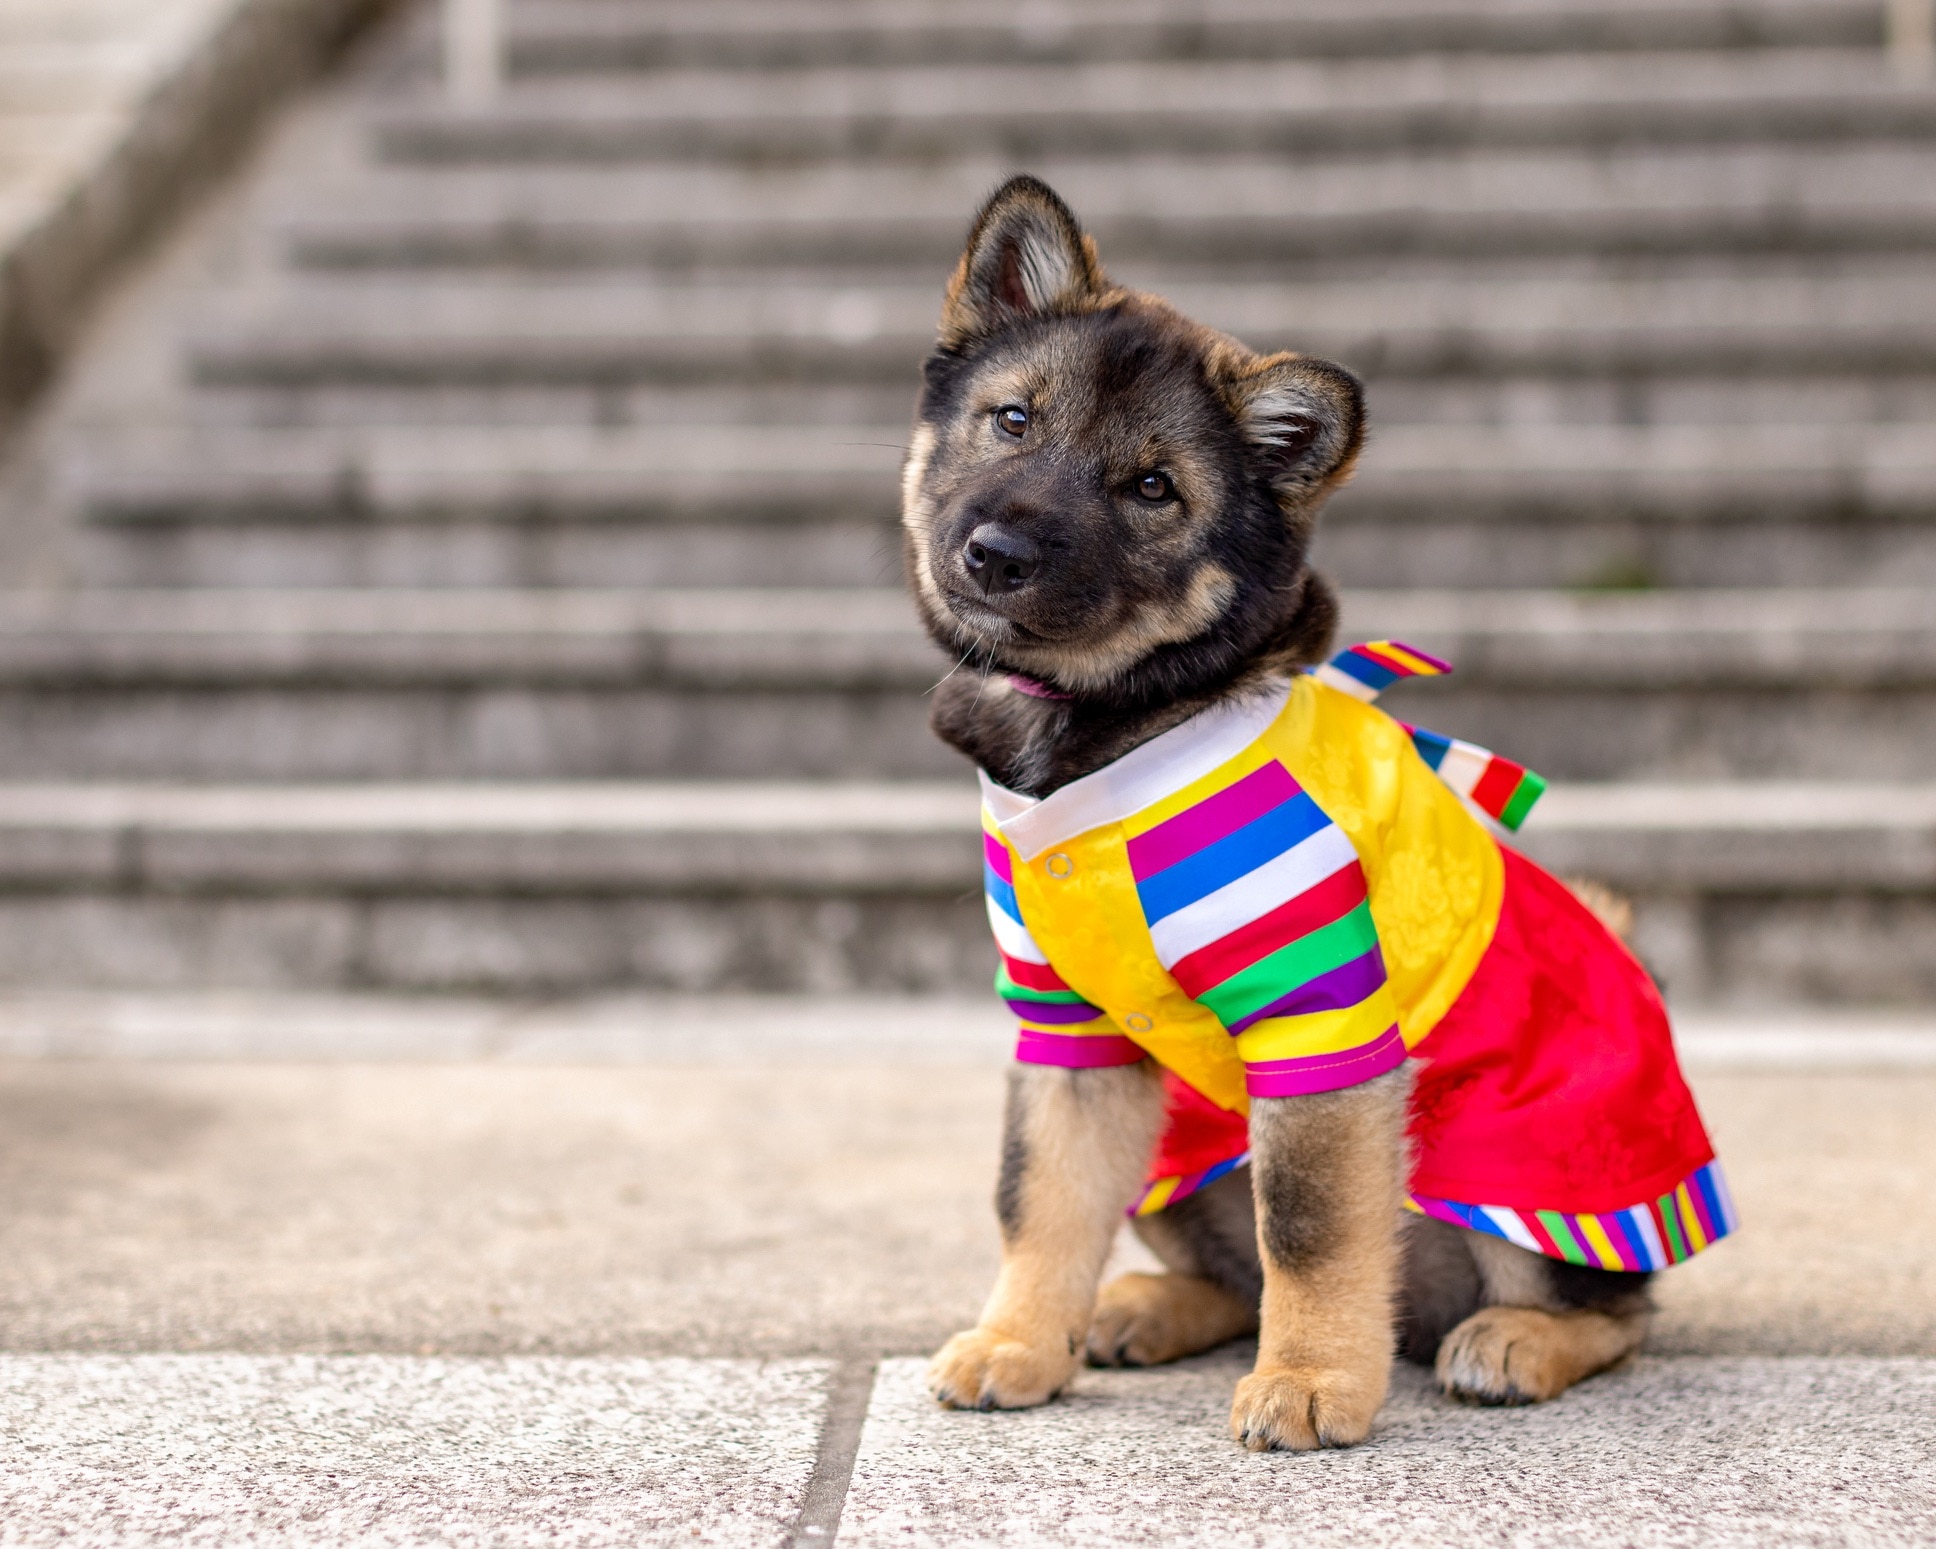 black and brown jindo puppy wearing a colorful shirt